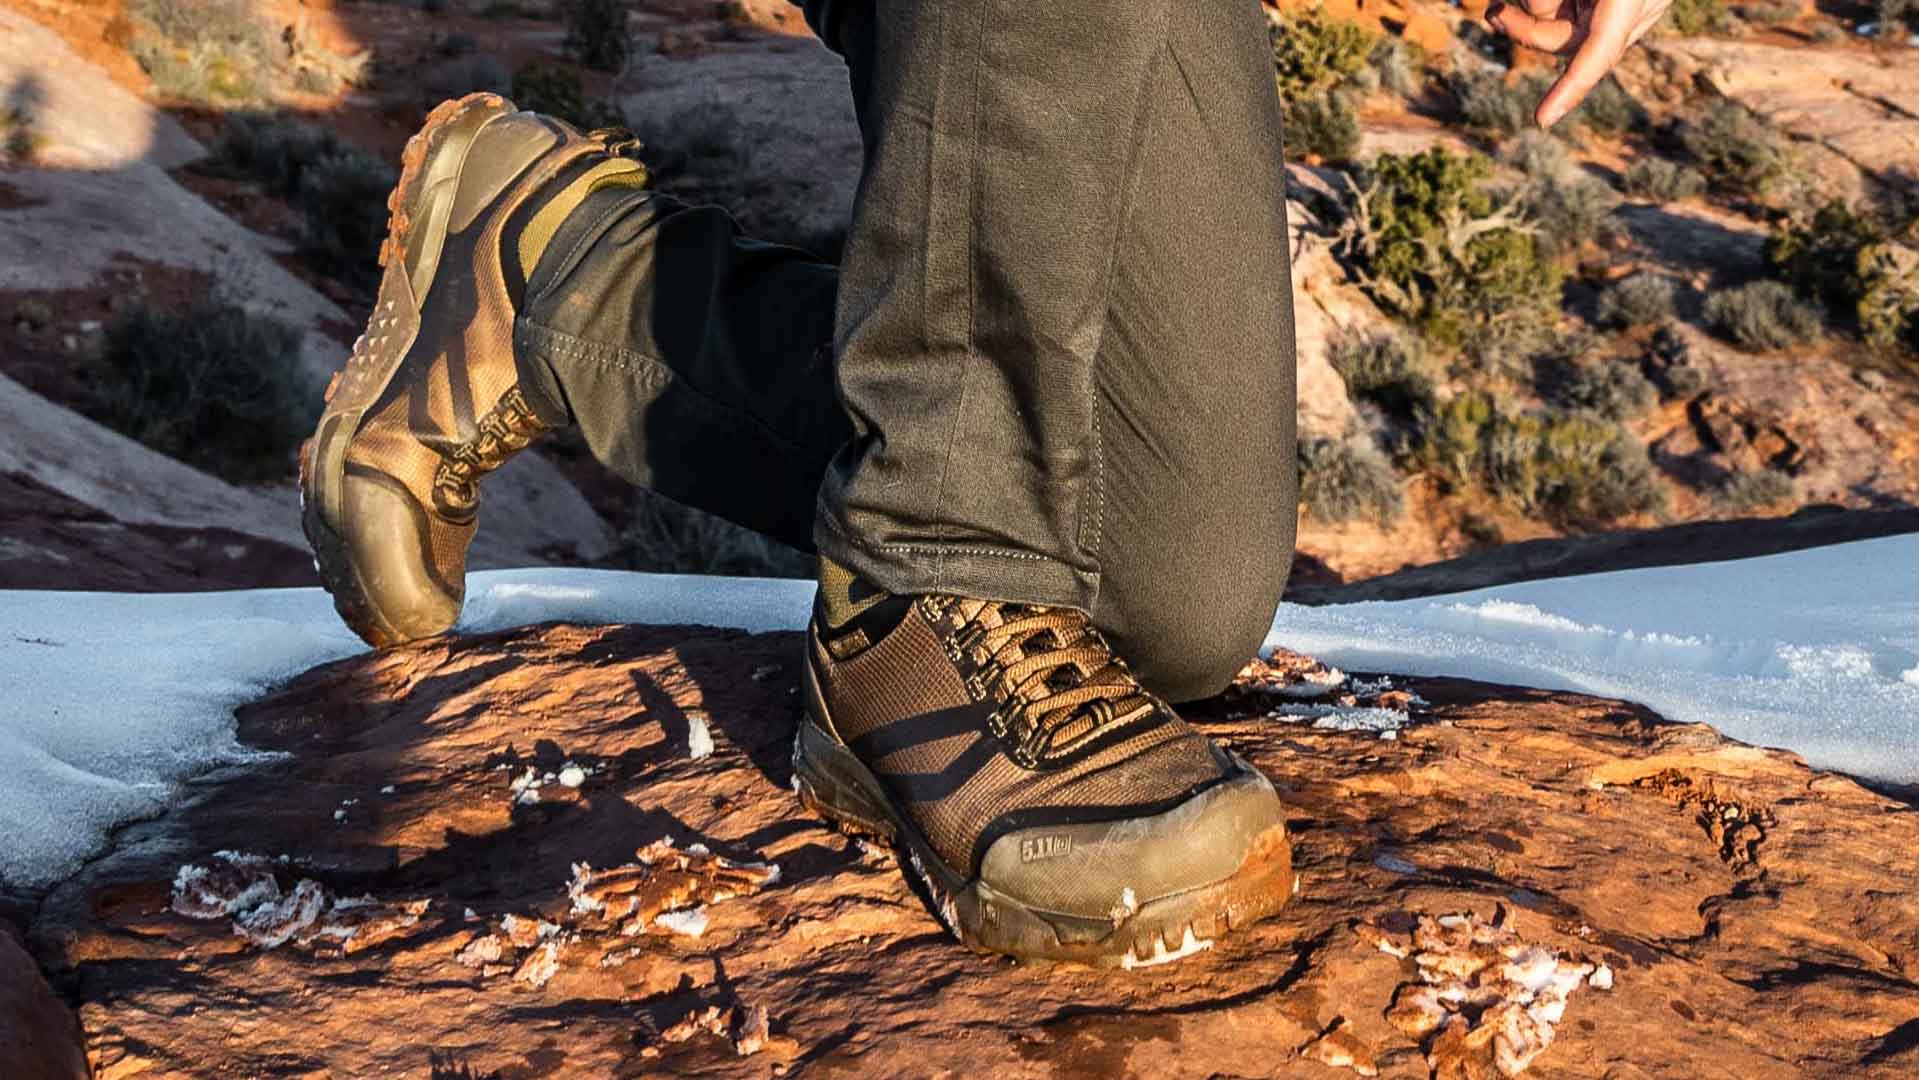 Alloutdoor Review - 5.11® A/T™ MID WATERPROOF BOOT